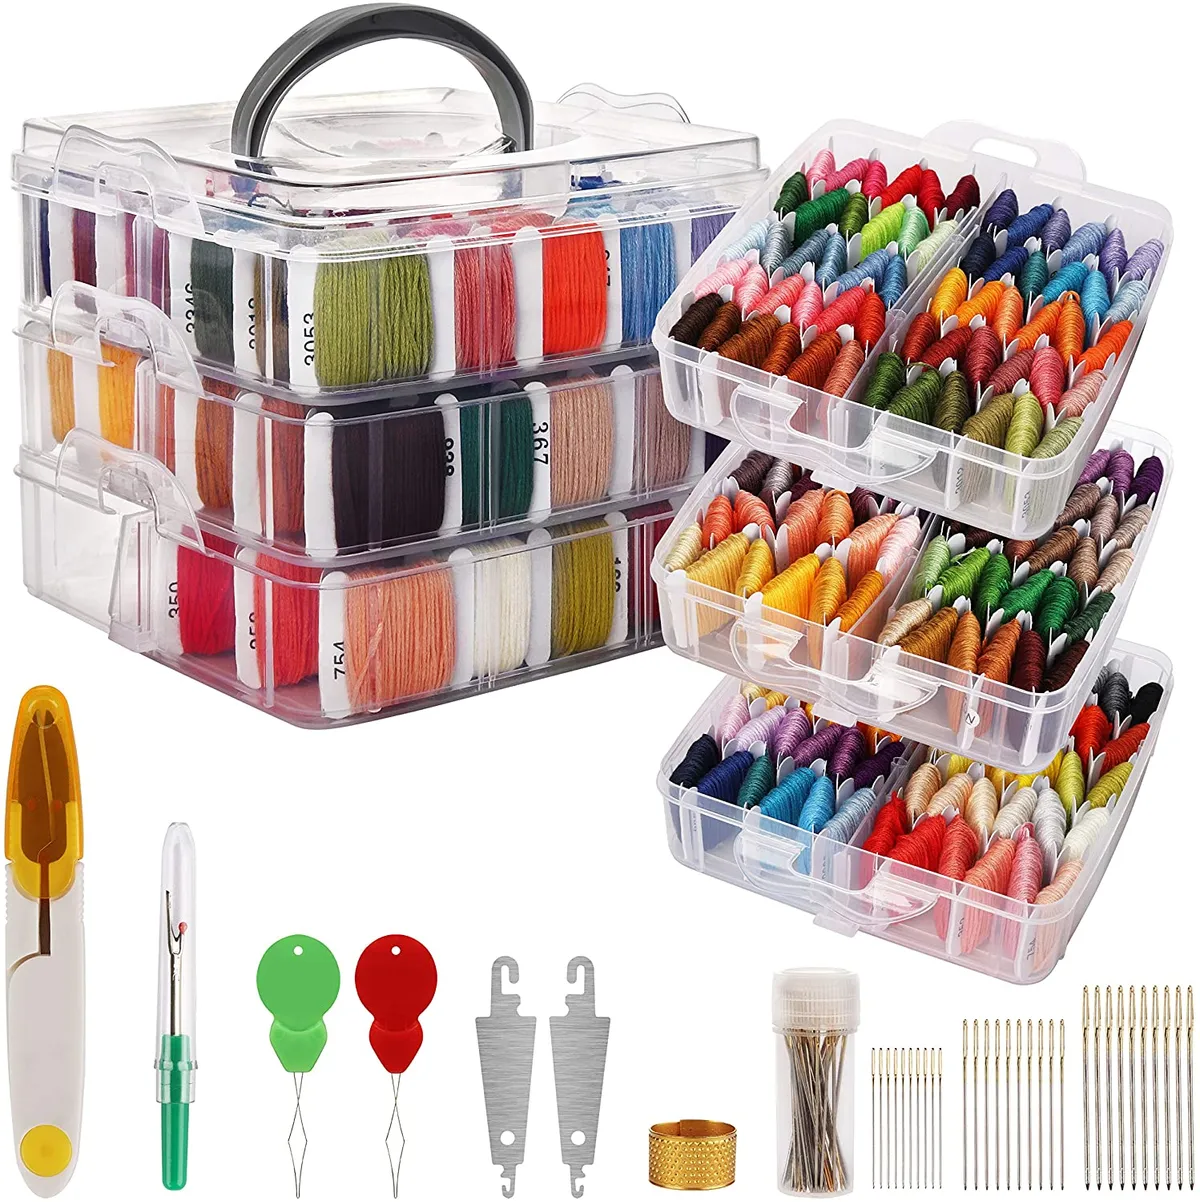 5 best sewing kits for any skill level